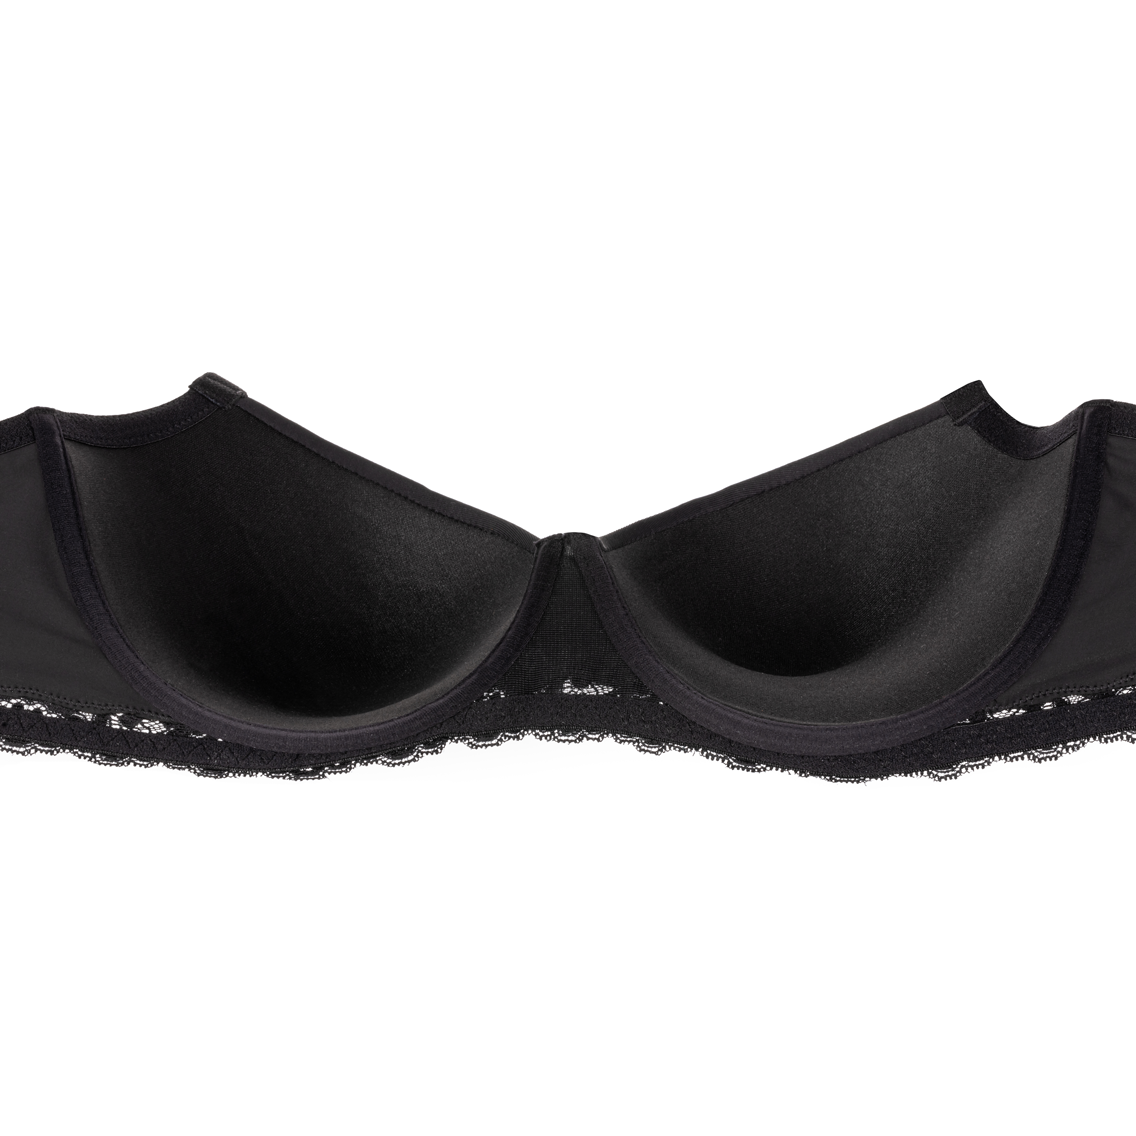 Best Bras For Asymmetrical Breasts - Front Room Underfashions